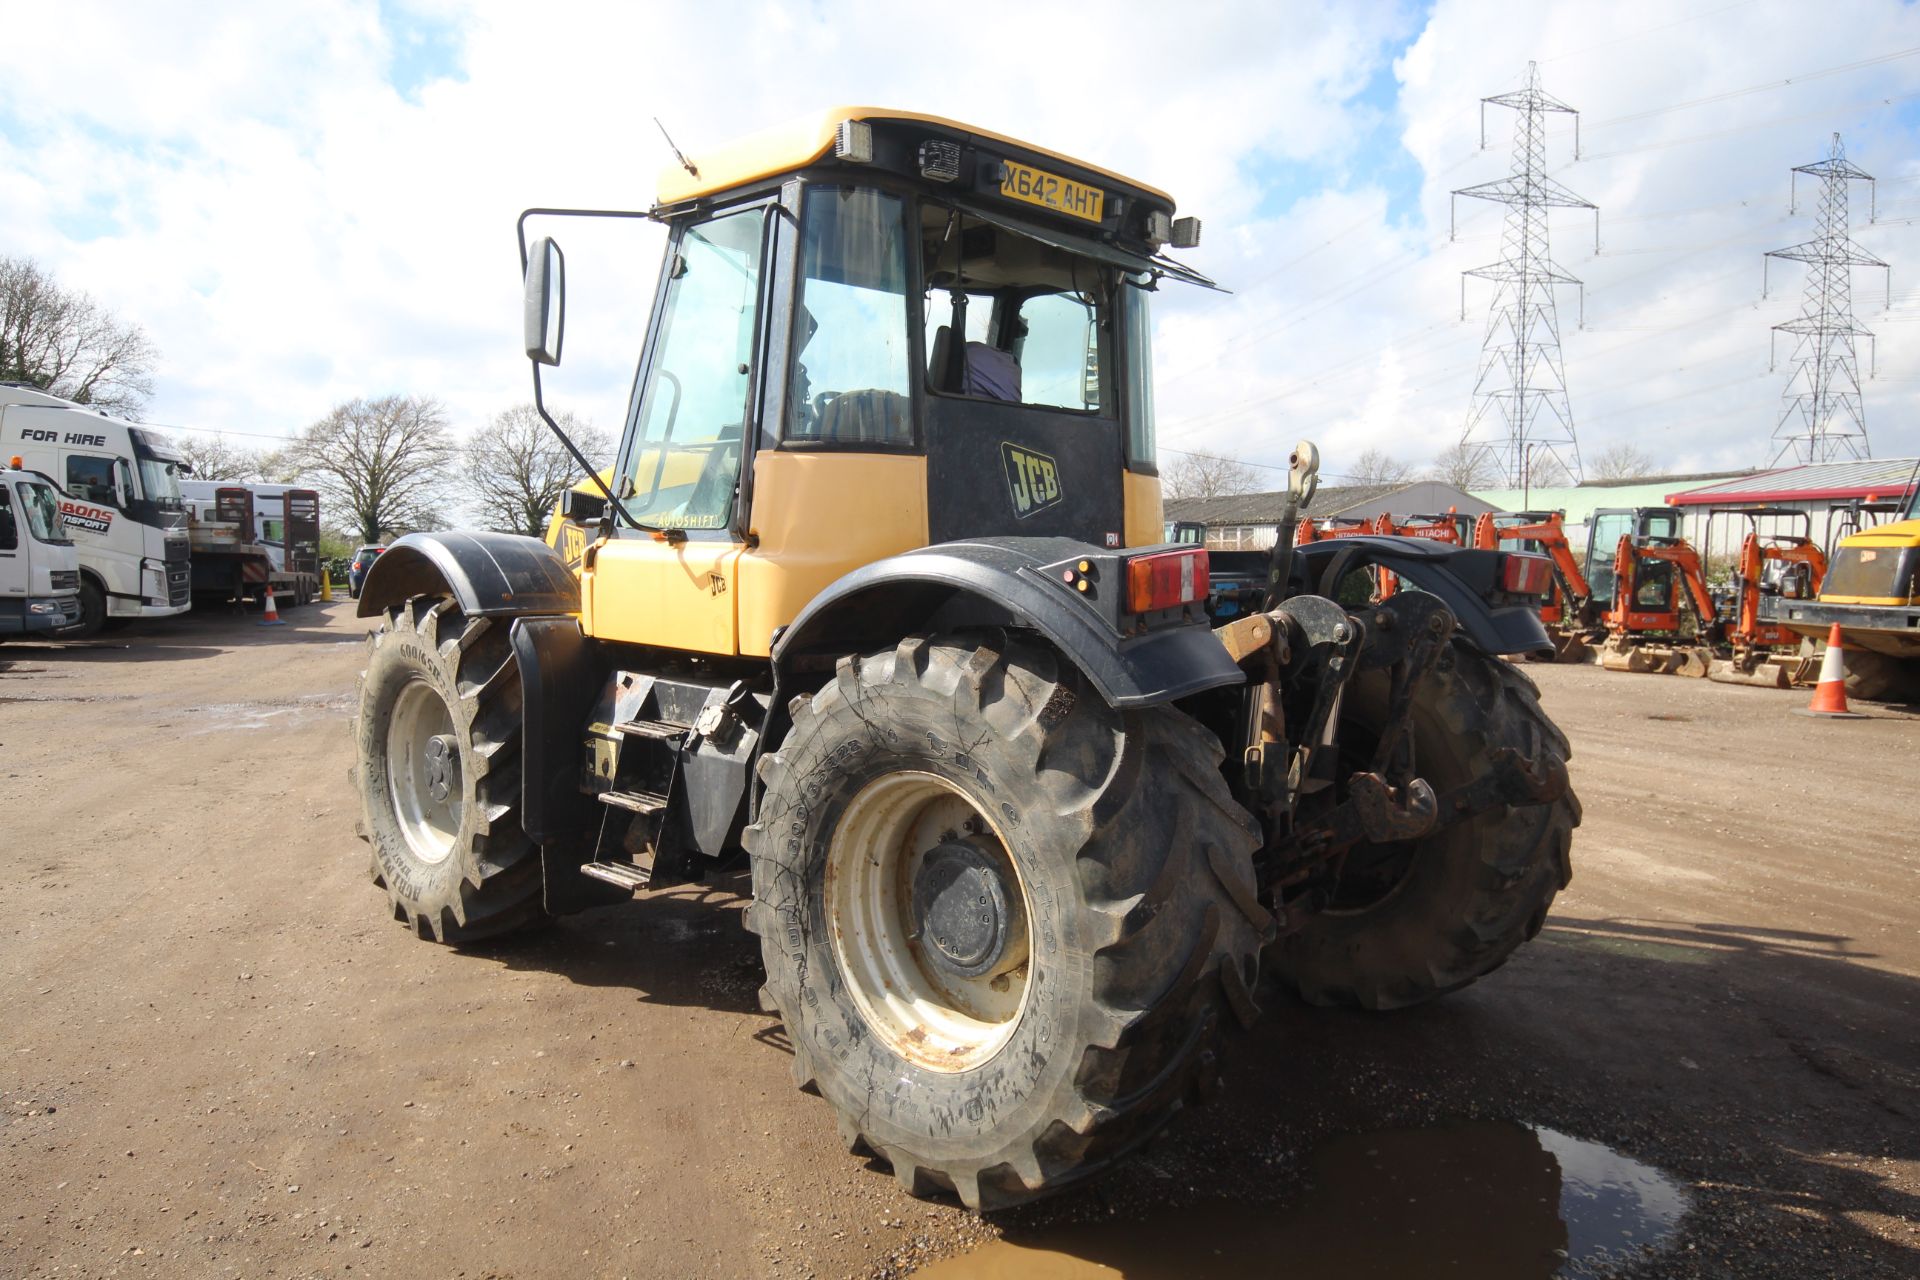 JCB Fastrac 3185 Autoshift 4WD tractor. Registration X642 AHT. Date of first registration 04/09/ - Image 3 of 71